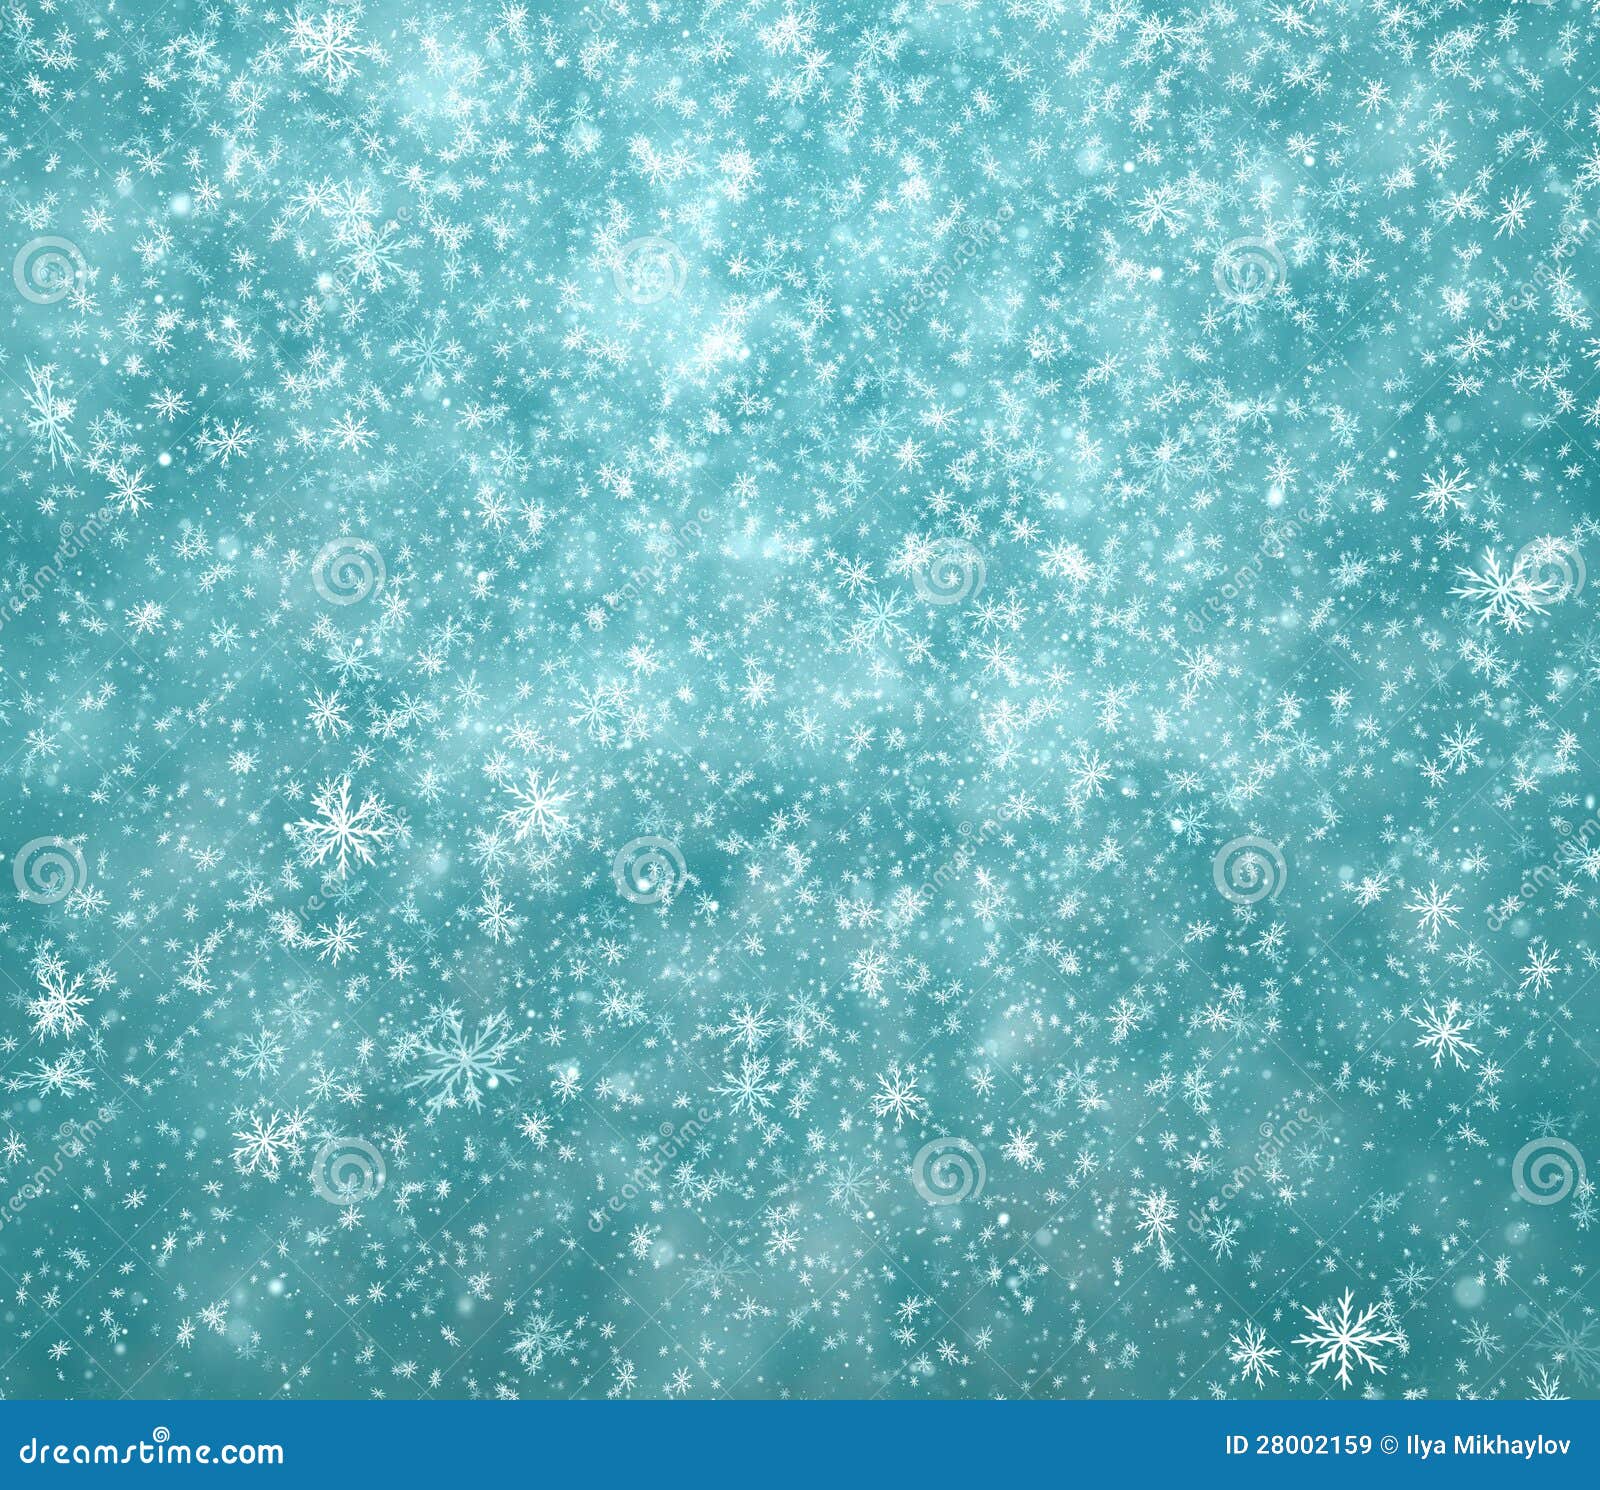 Falling snowflakes, snow background. The winter background, falling snowflakes